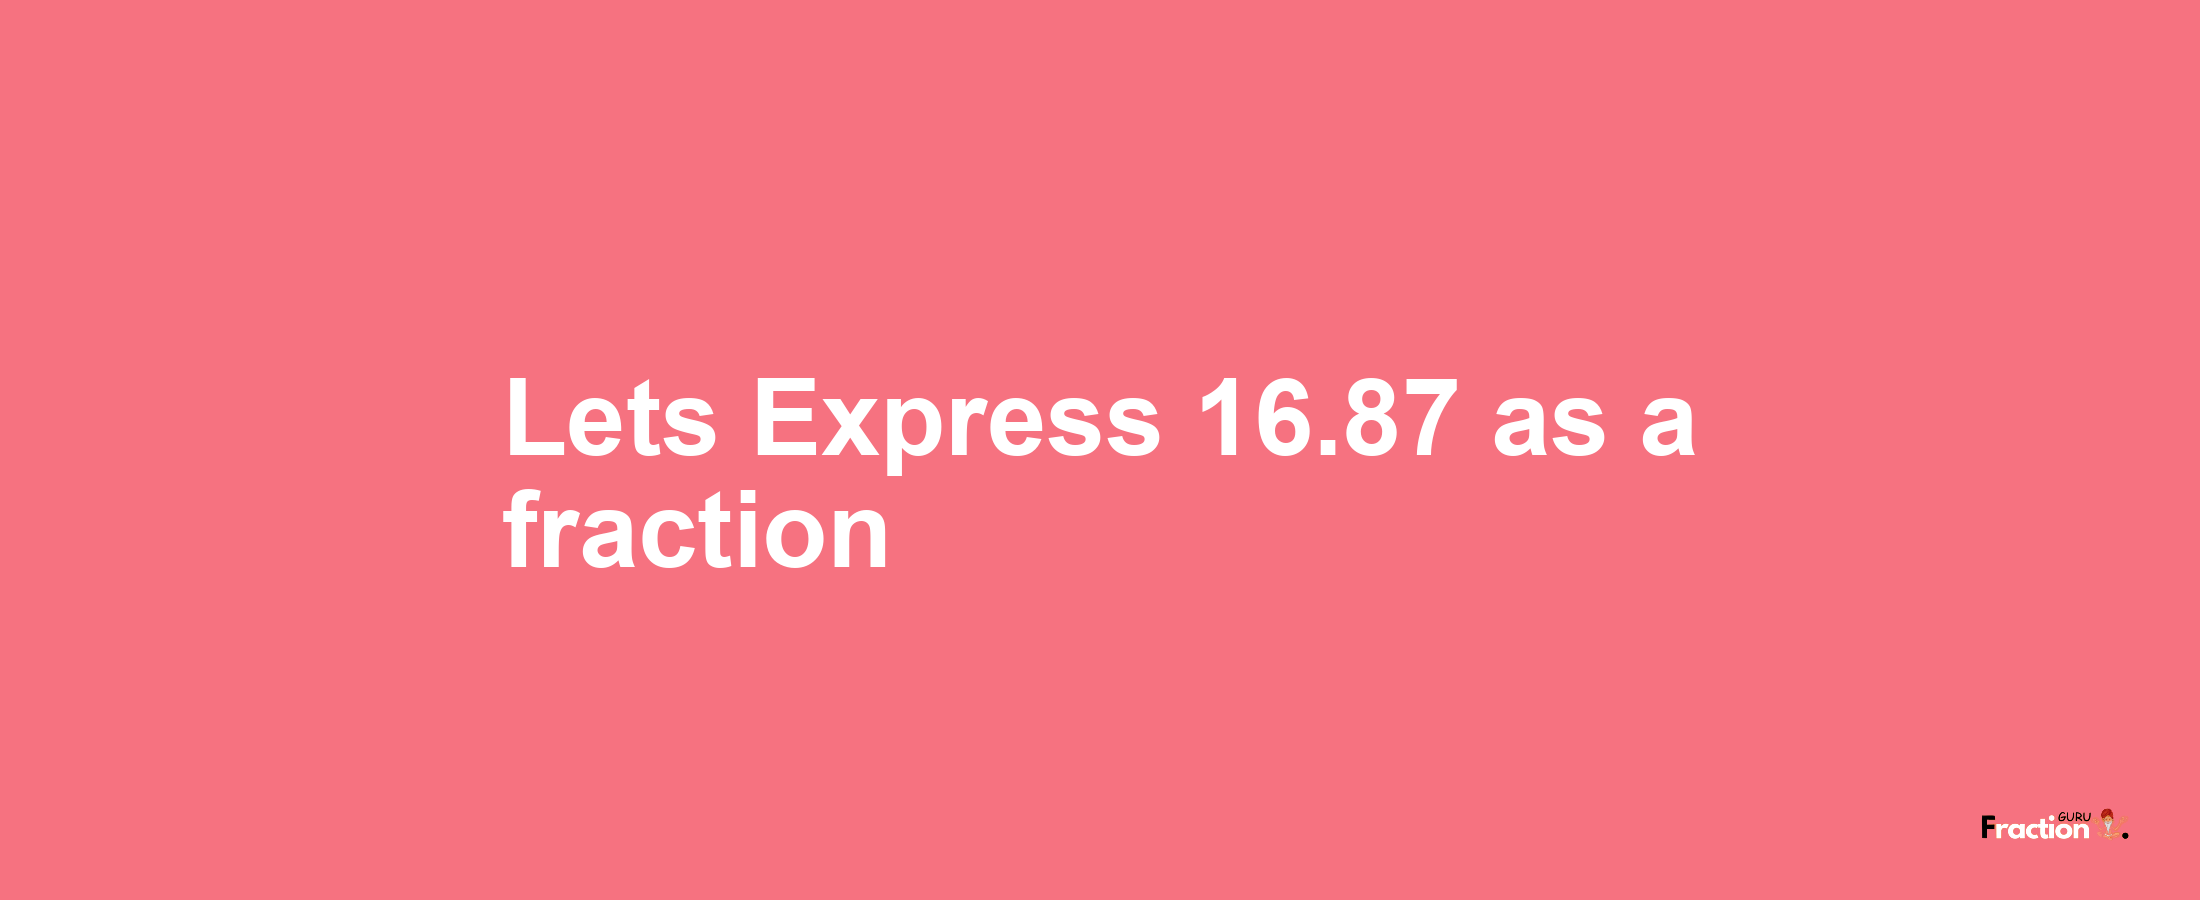 Lets Express 16.87 as afraction